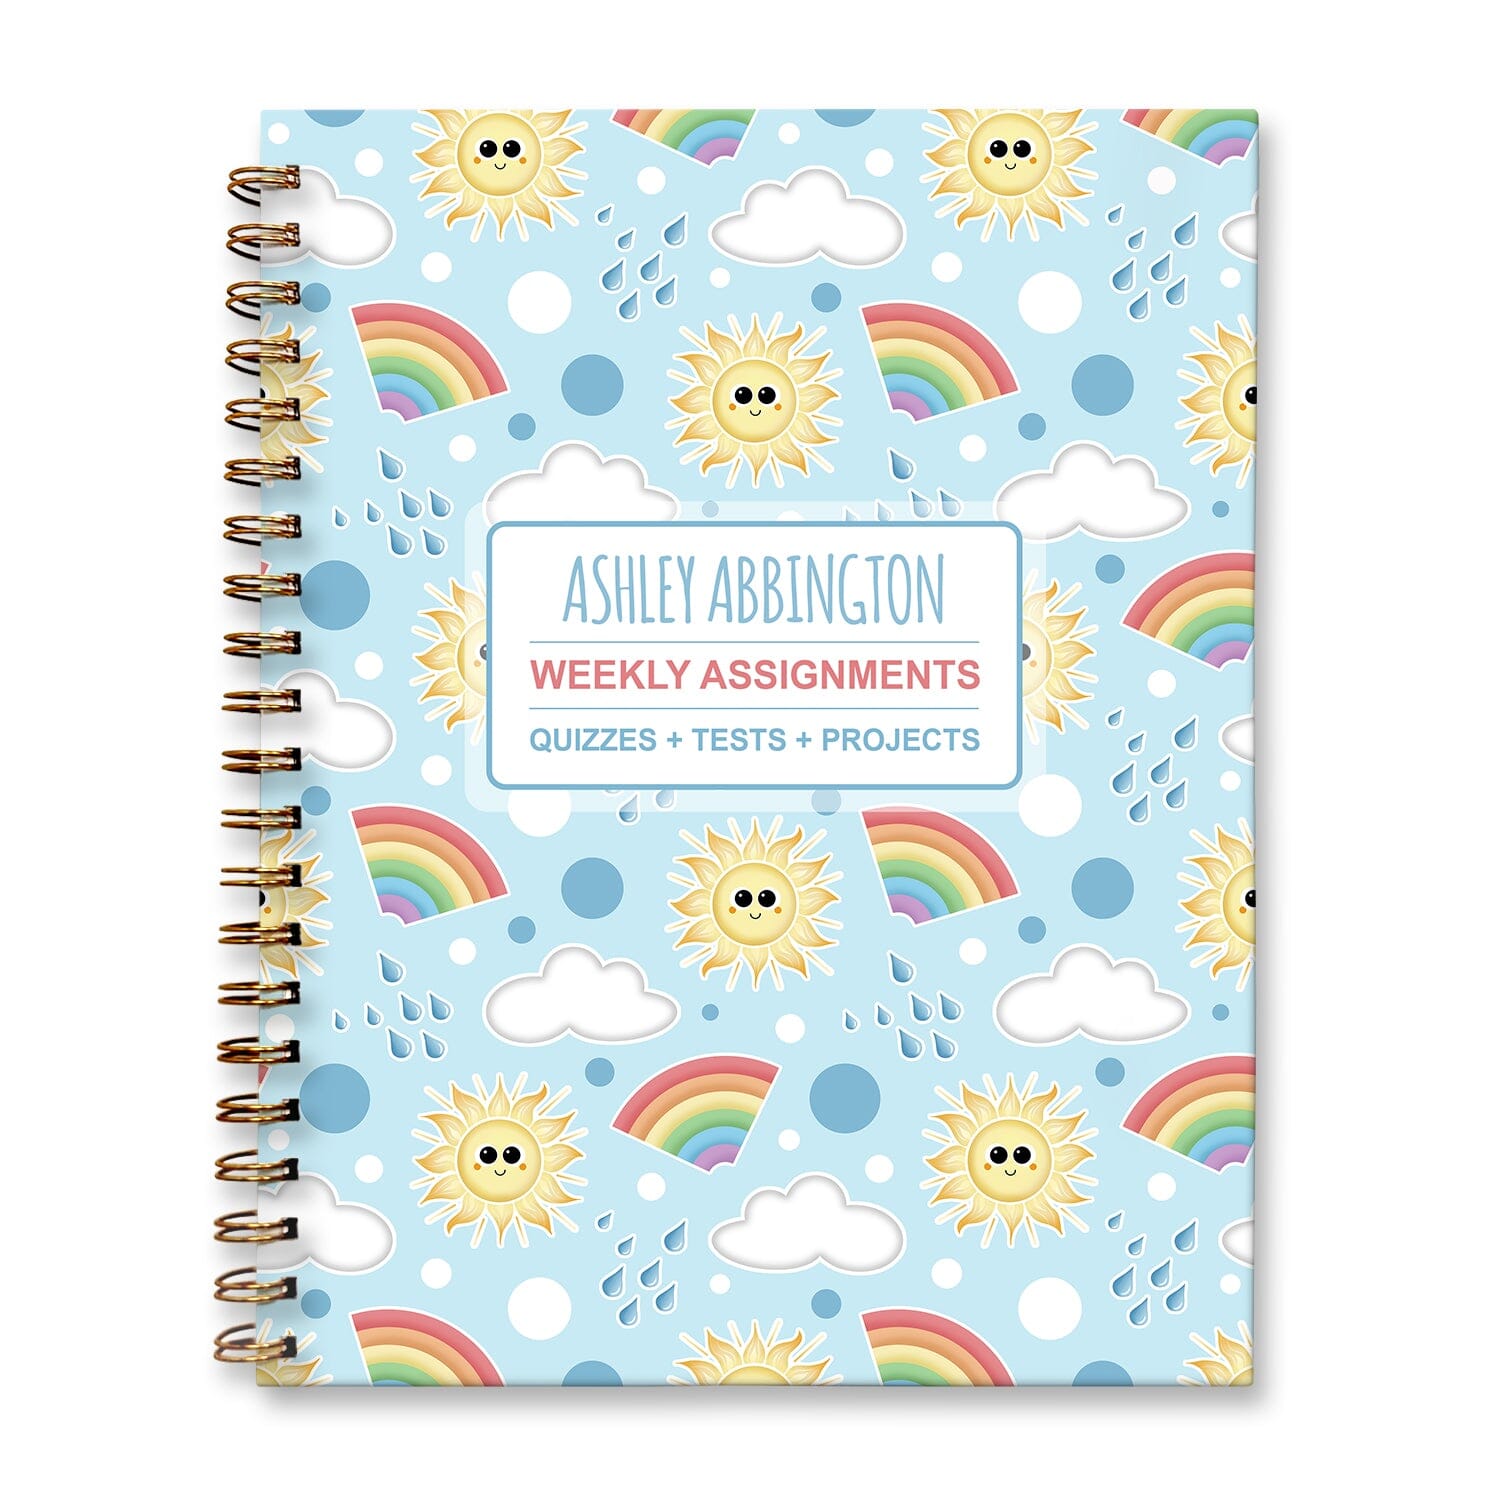 Personalized Sunshine Rainbows Weekly Assignments Book for students to track their homework, quizzes and tests, and projects every week for school. 